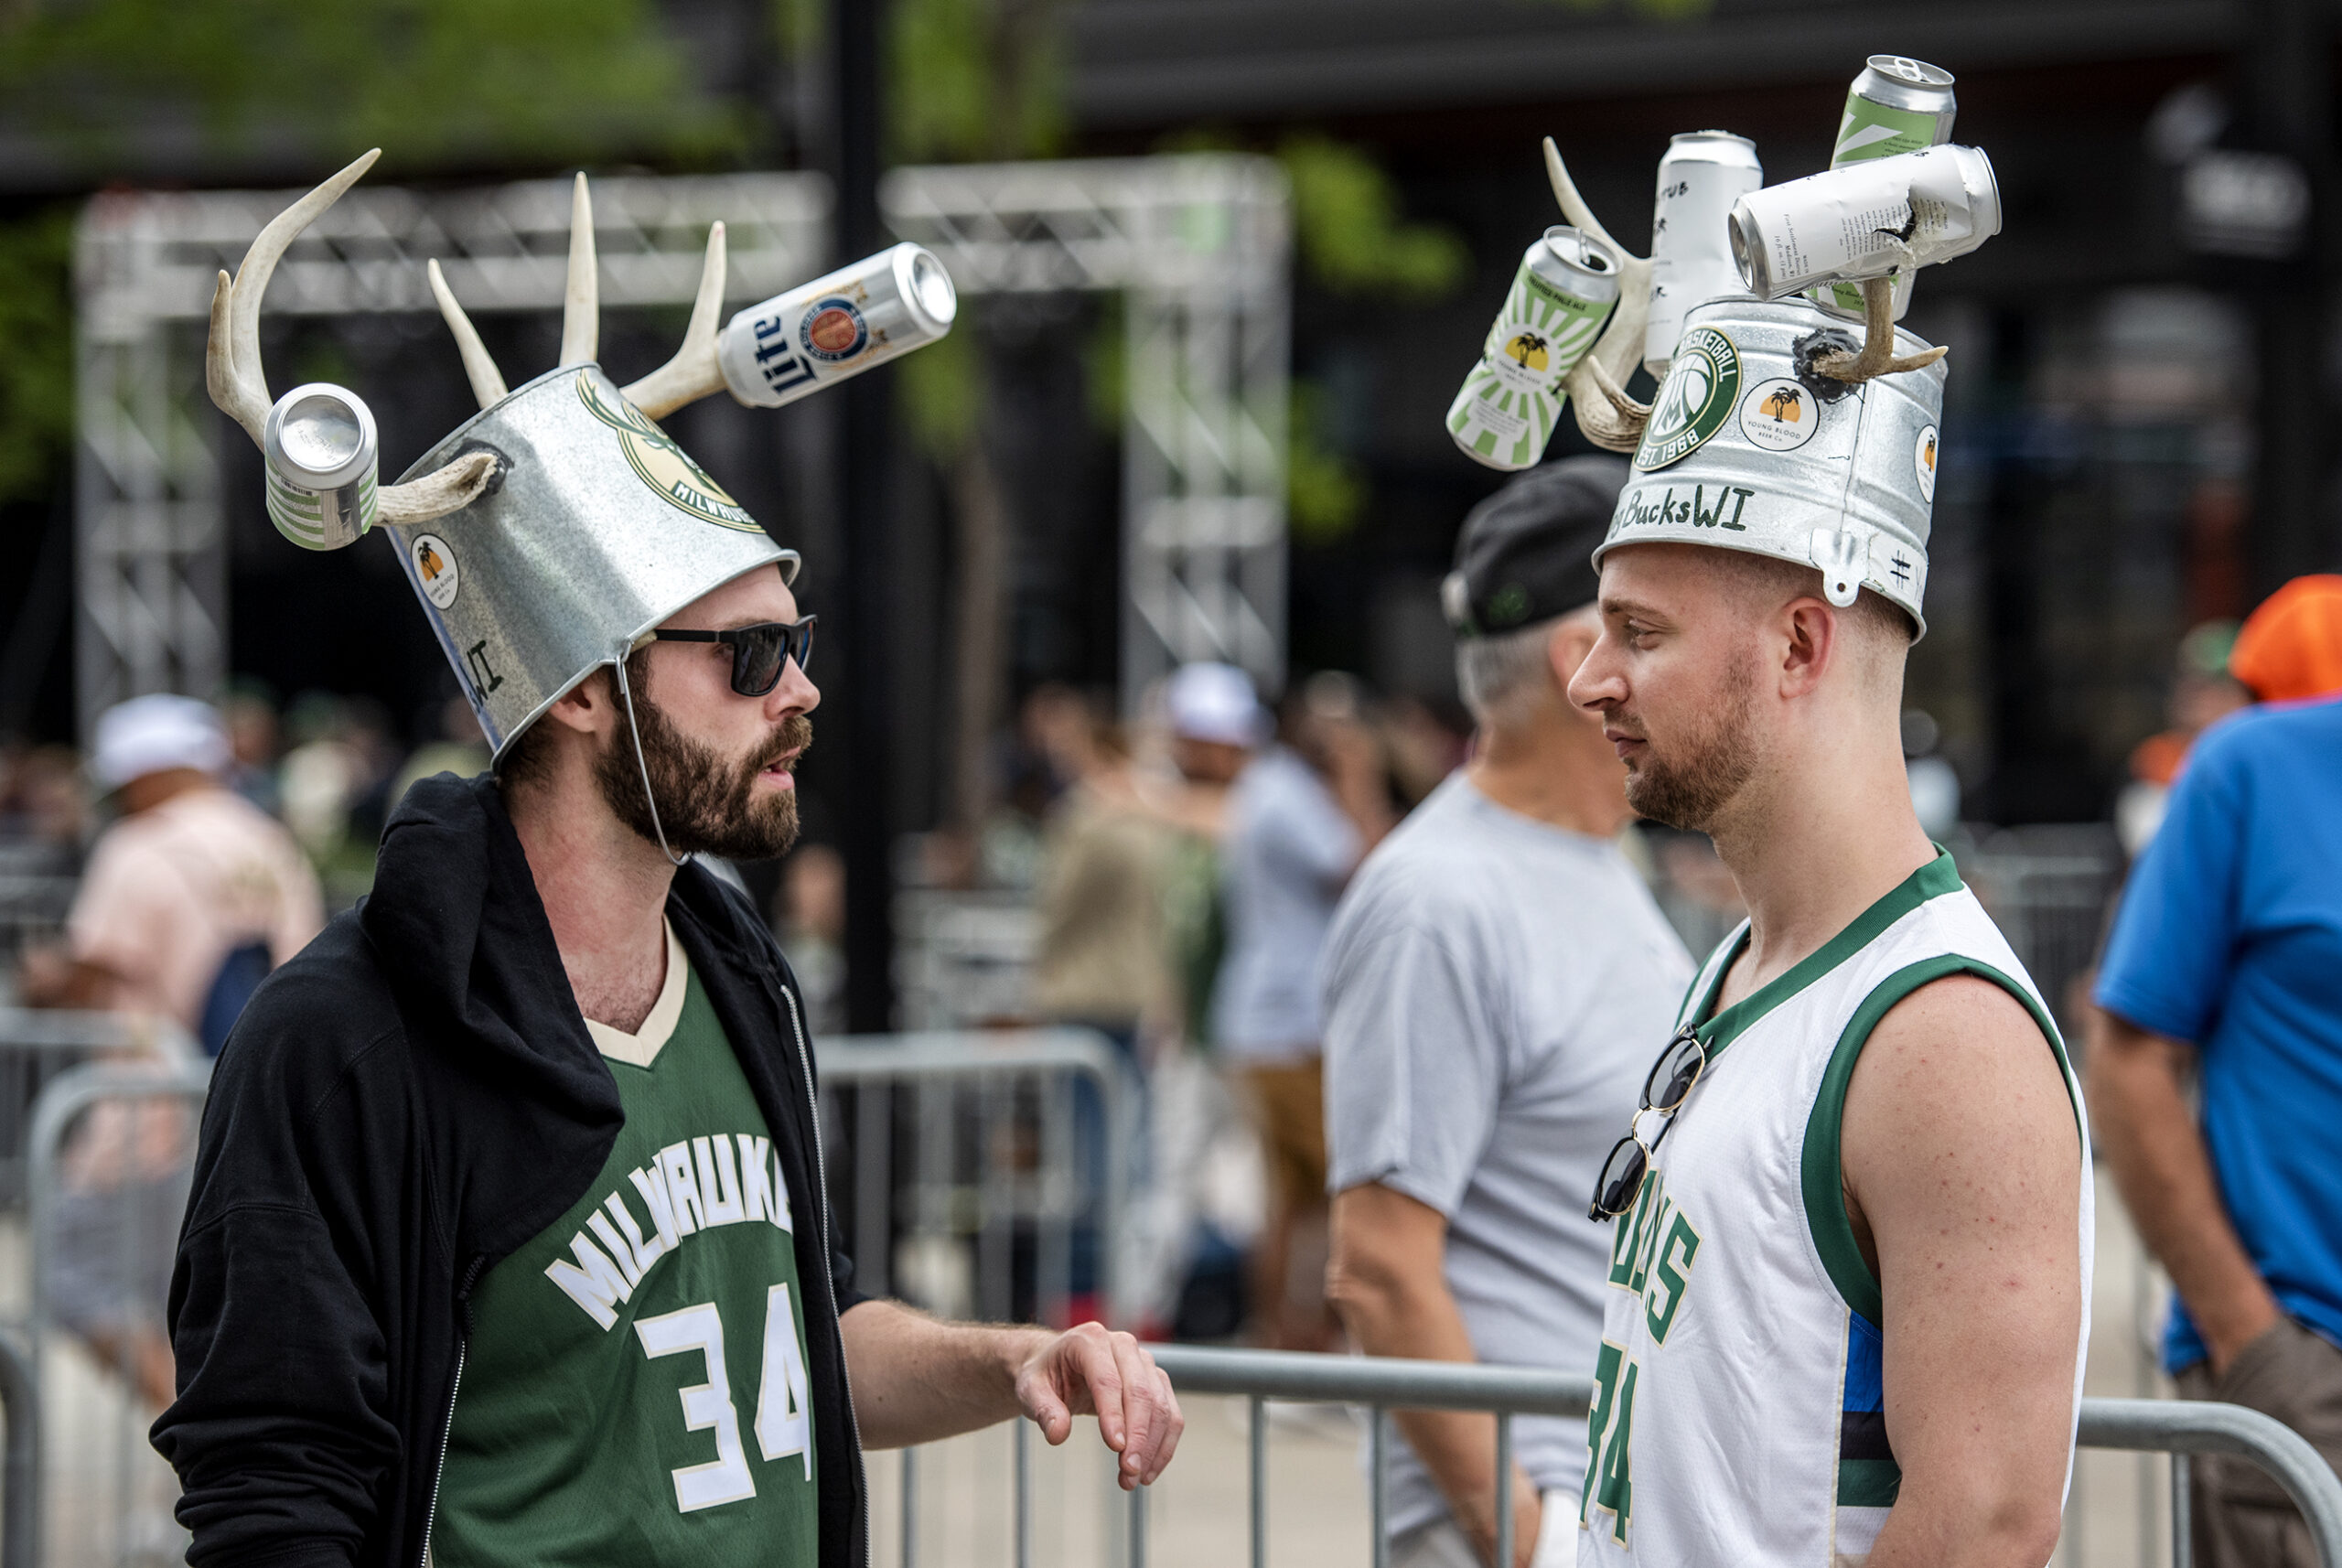 Two fans wear buckets on their heads with antlers and beer cans attached.